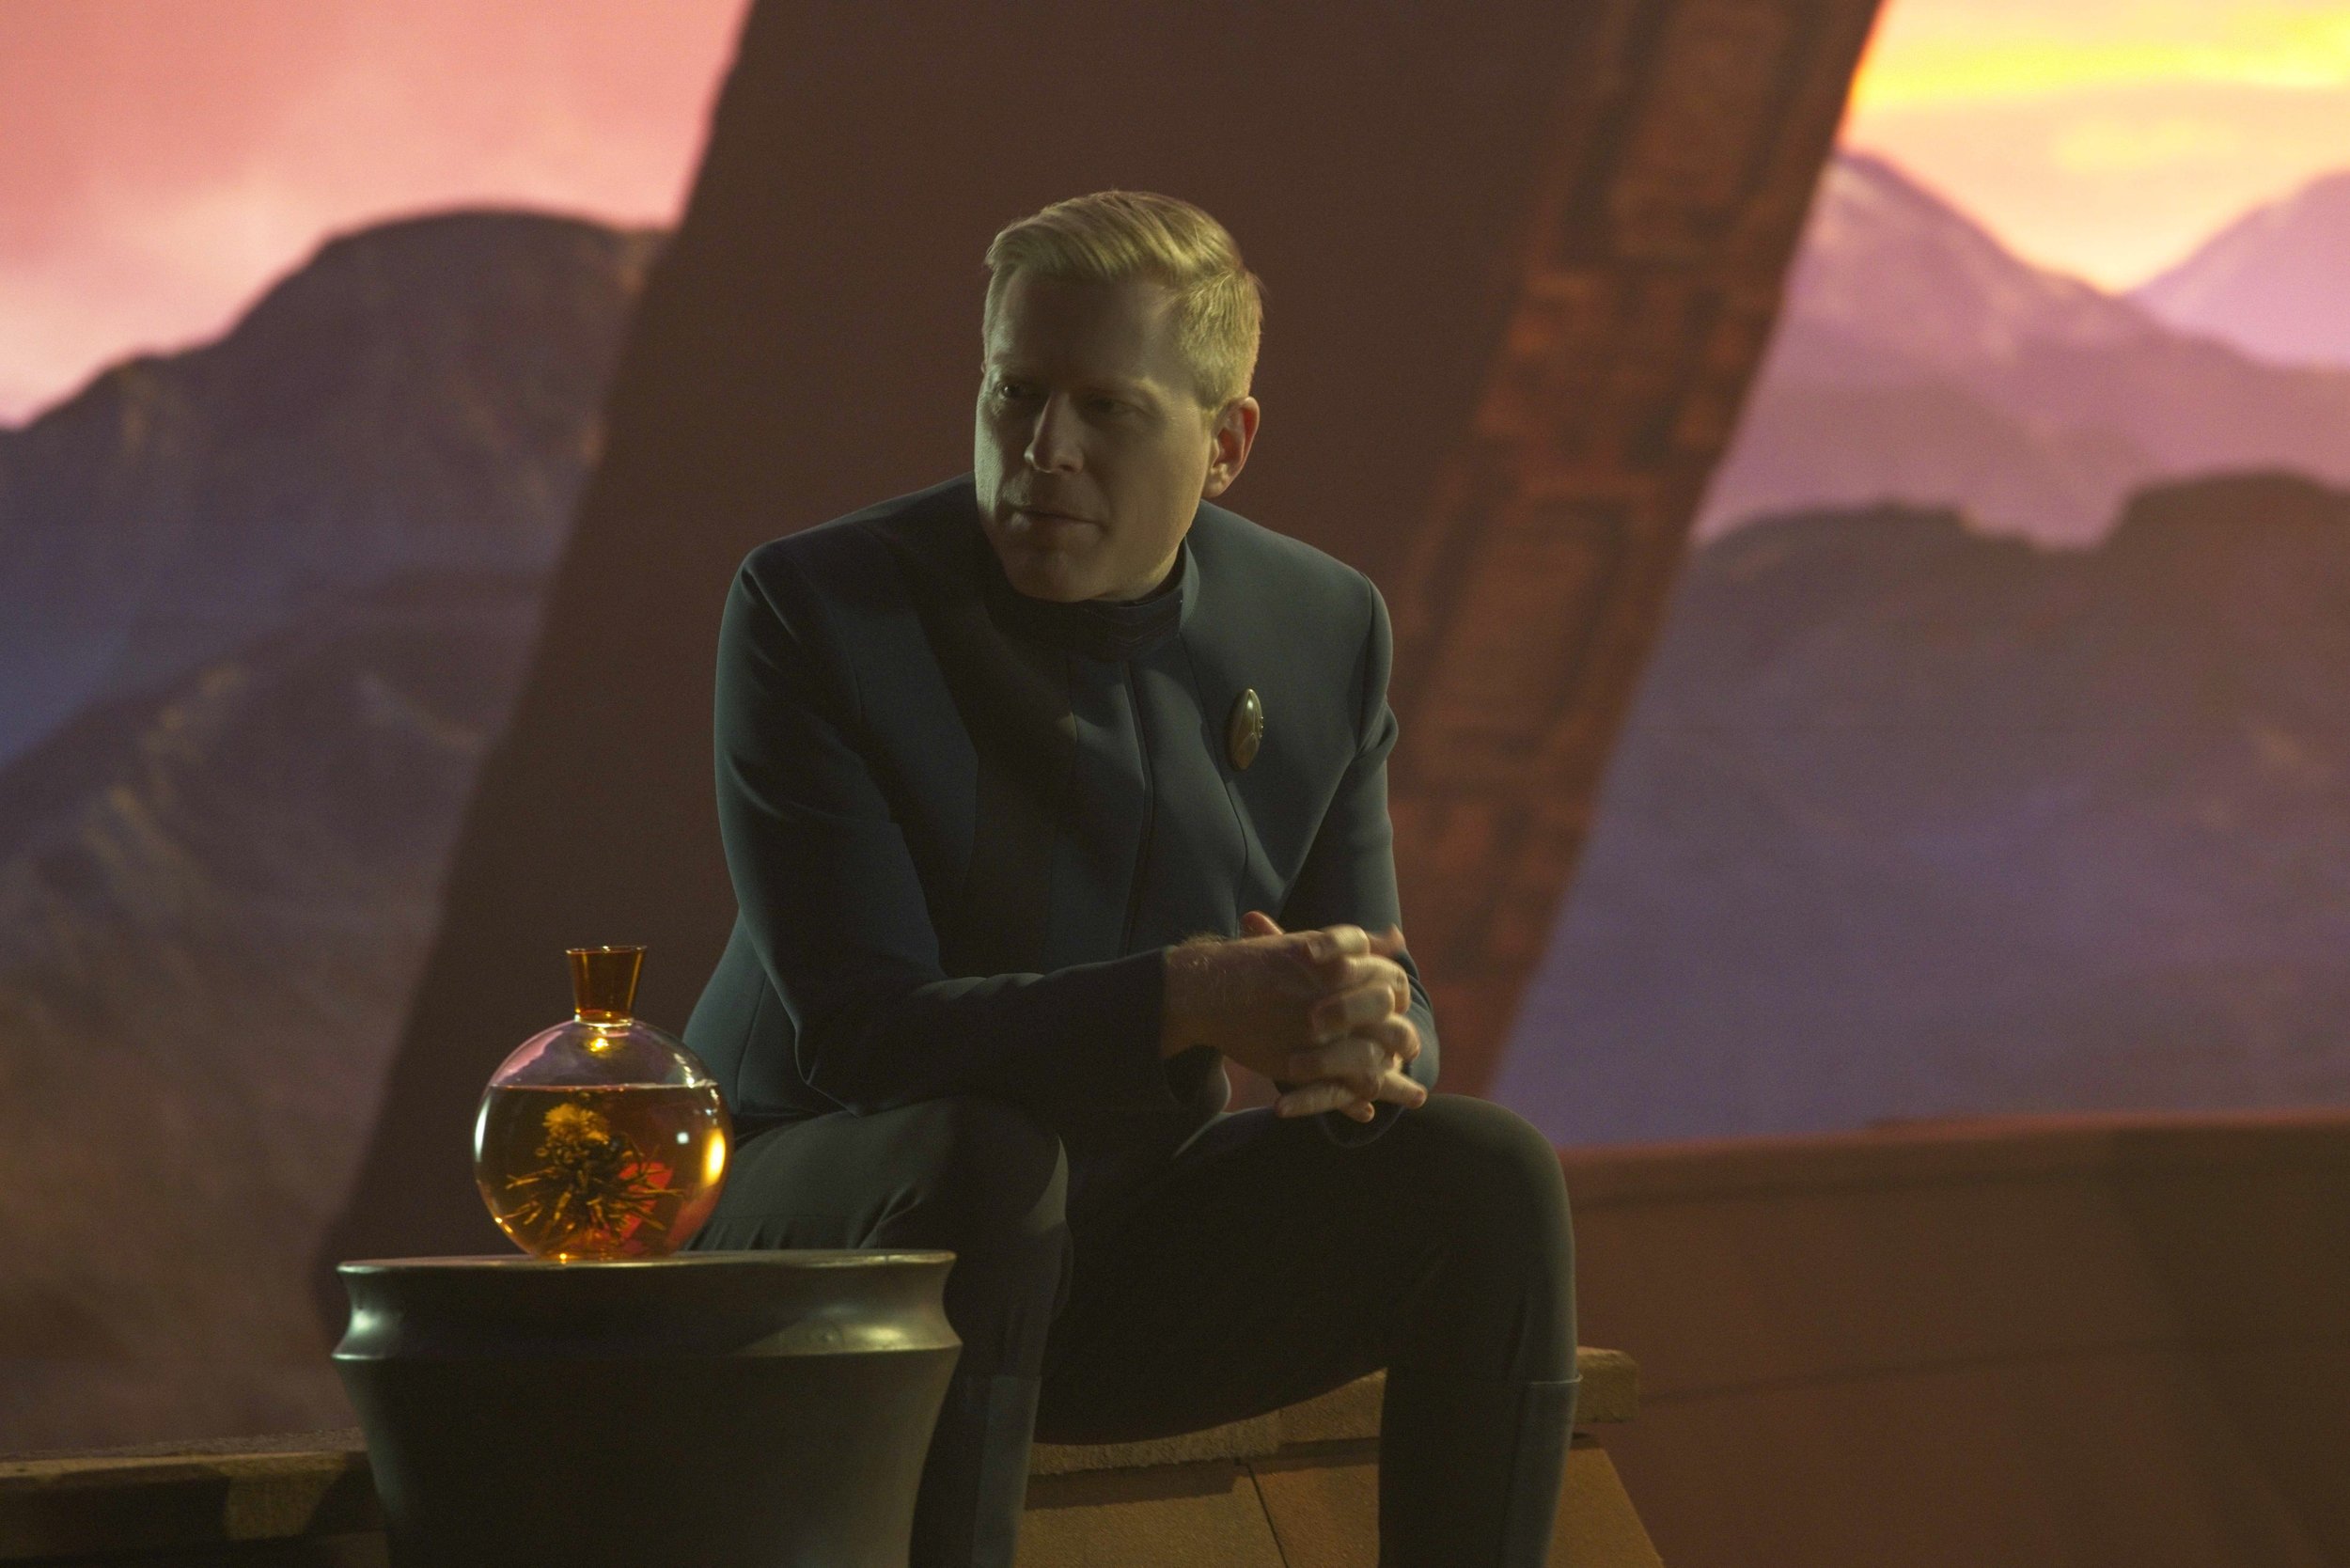   Pictured: Anthony Rapp as Stamets of the Paramount+ original series STAR TREK: DISCOVERY. Photo Cr: Michael Gibson/Paramount+ © 2021 CBS Interactive. All Rights Reserved.  